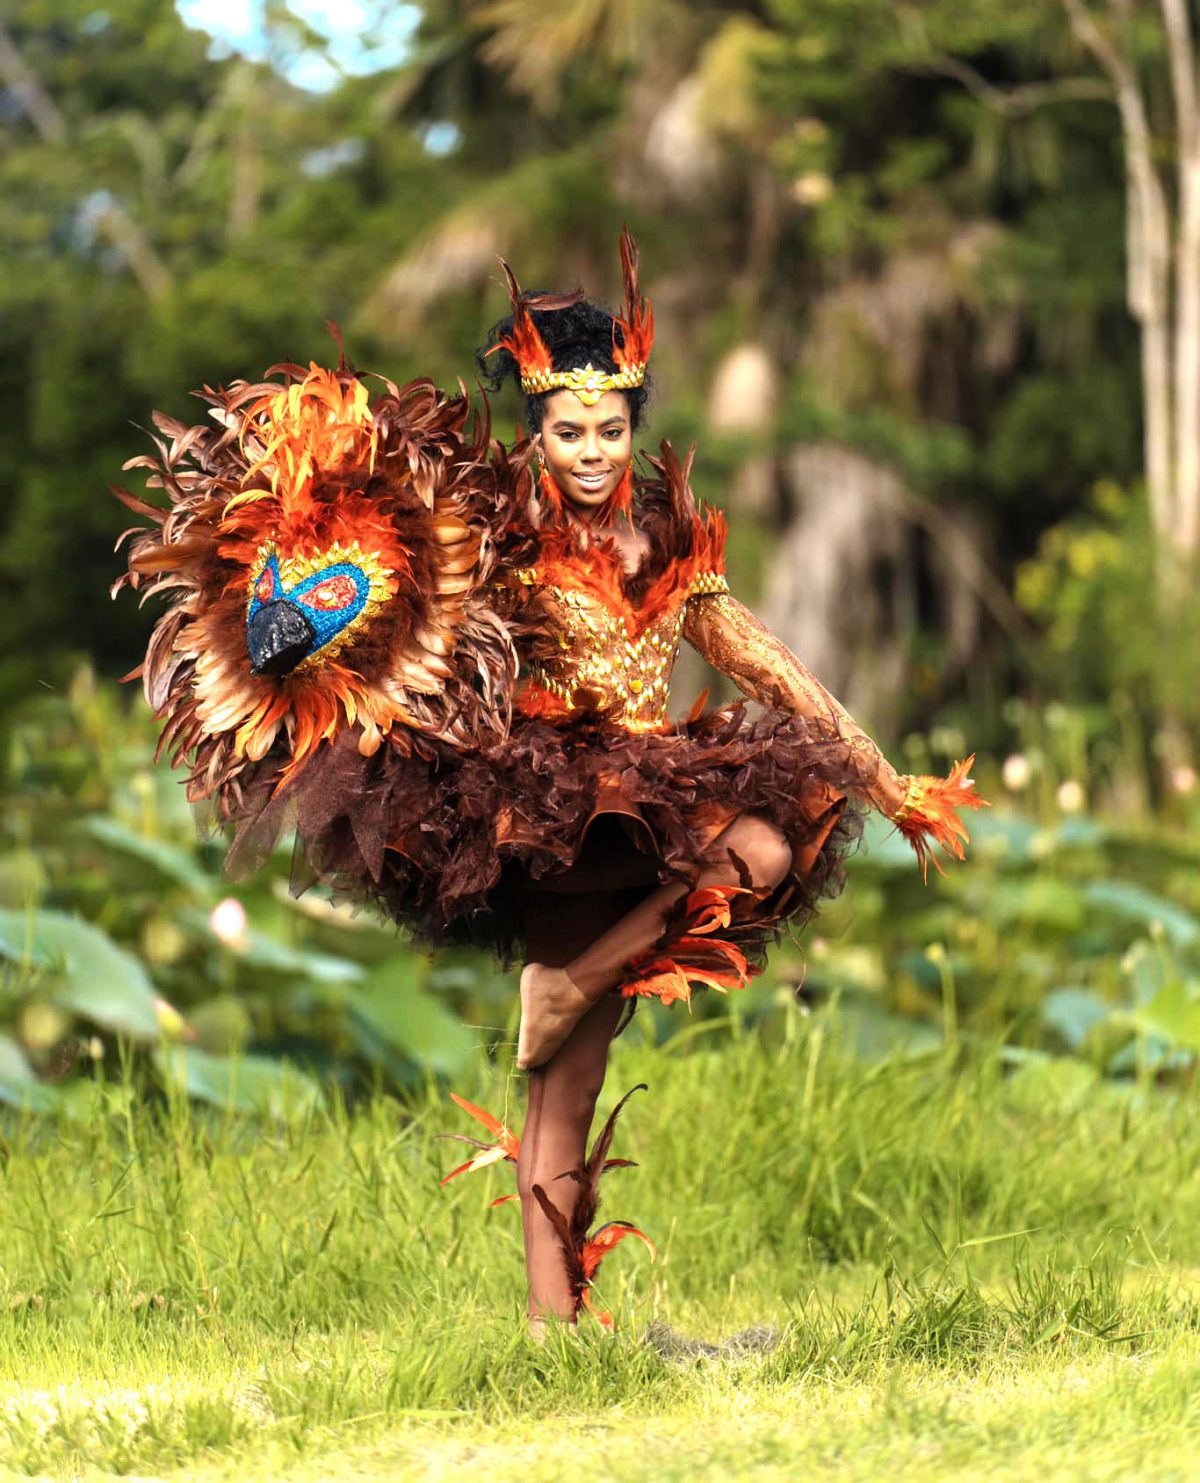 The reigning Miss World Guyana Andrea King is seen splendidly dressed as the country’s national bird, the Canje Pheasant which was designed by Mwanza Glenn. King is currently in India to participate in the Miss World pageant slated for March 9th at the World Convention Centre, in Mumbai. The photograph was taken in the Botanical Garden by Travon Barker of Keynote Productions.